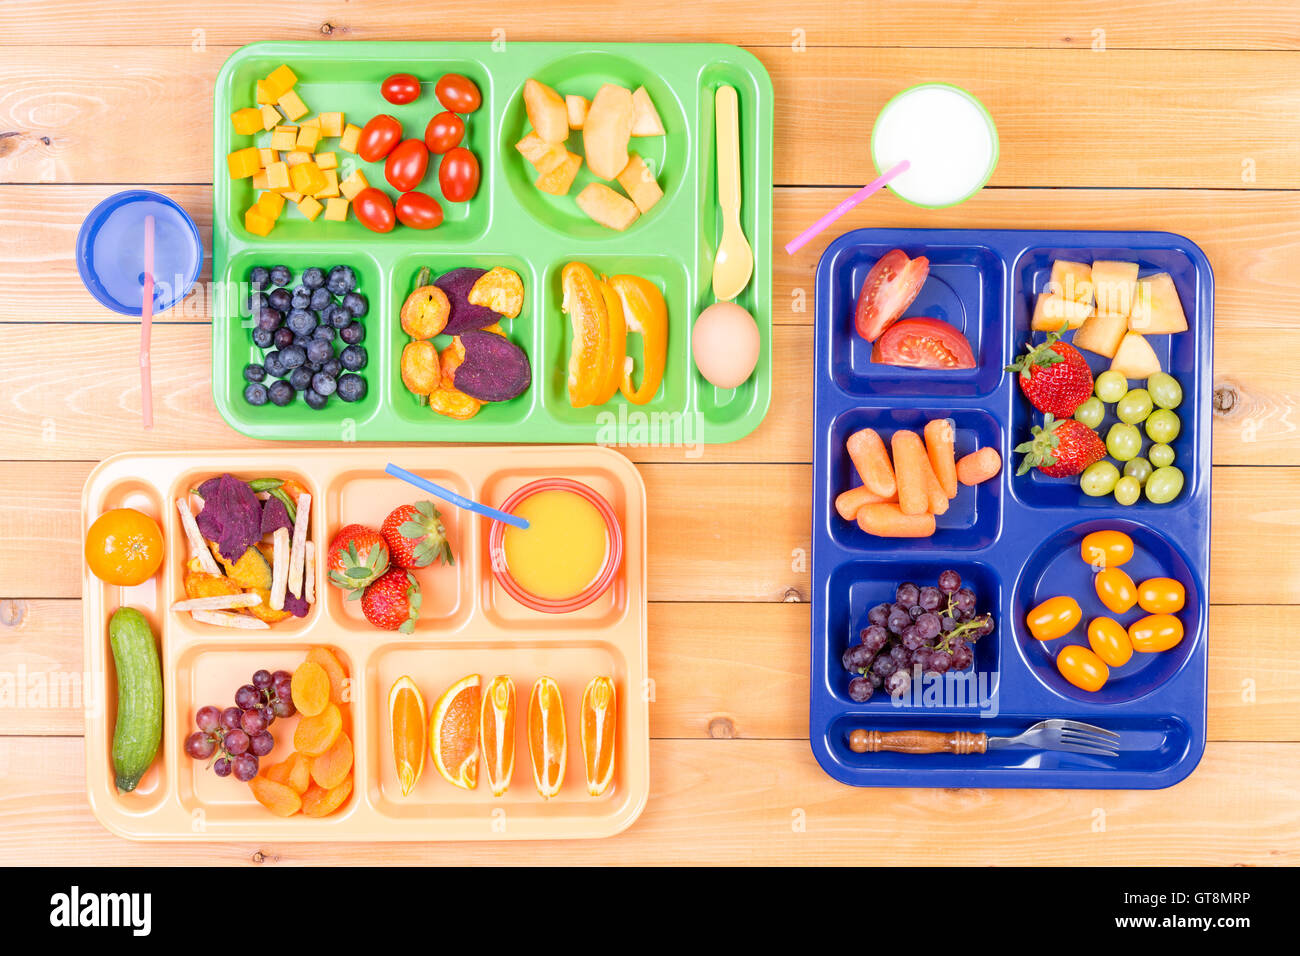 Top down view of colorful plastic lunch trays filled with delicious pieces of fruit and vegetables along side cups of milk or ju Stock Photo